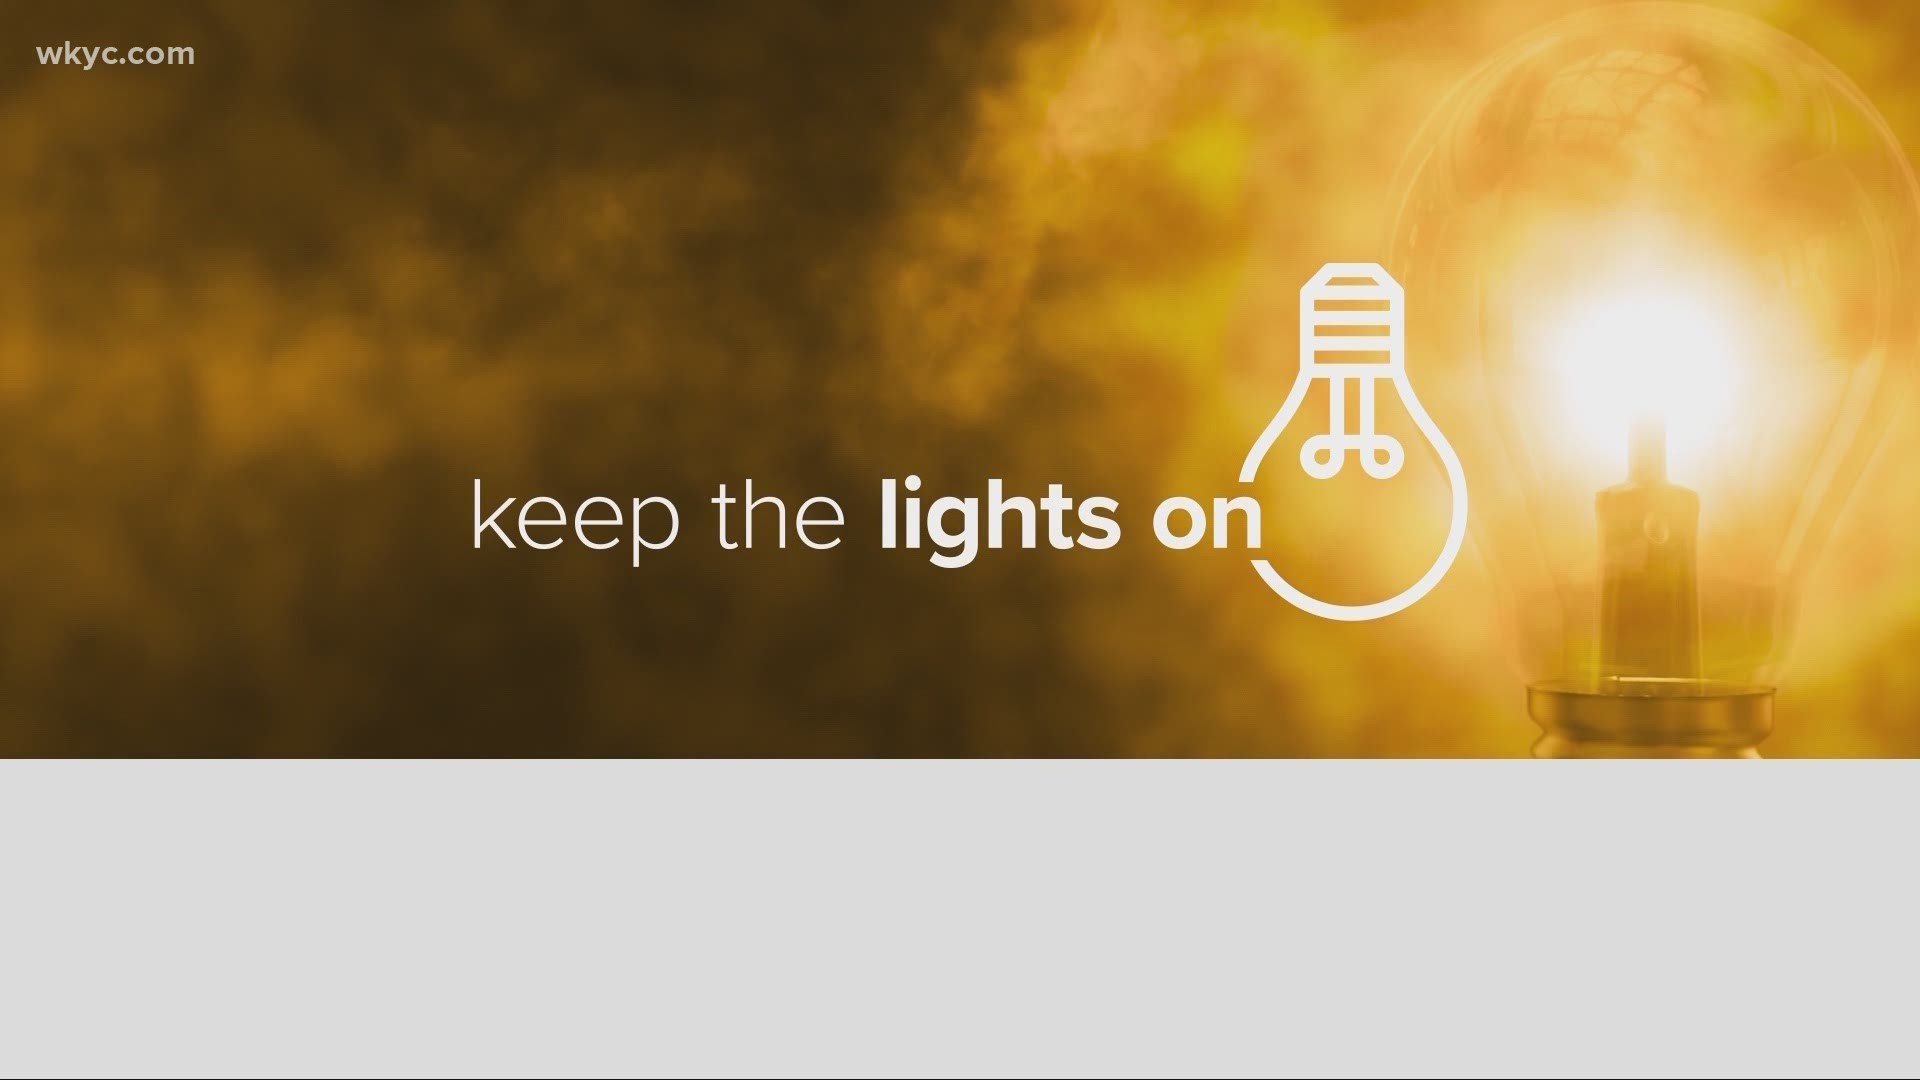 ‘Keep the Lights on CLE’ is a campaign to raise money for those in our community facing utility shutoffs. To donate, visit www.KeepTheLightsOnCLE.org.